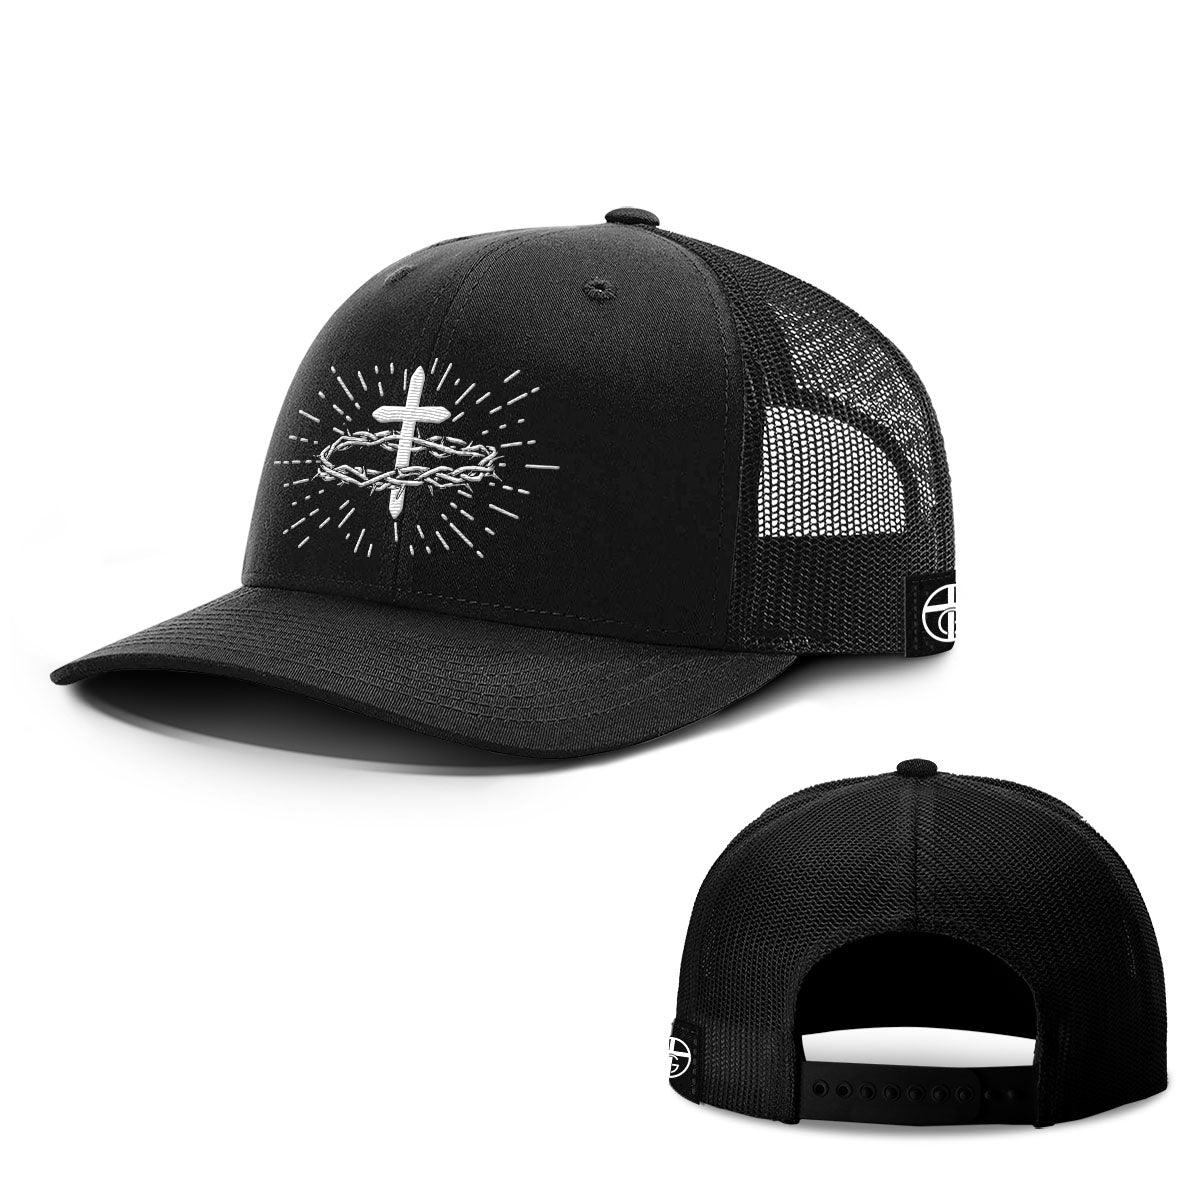 Crown Of Thorns Hats